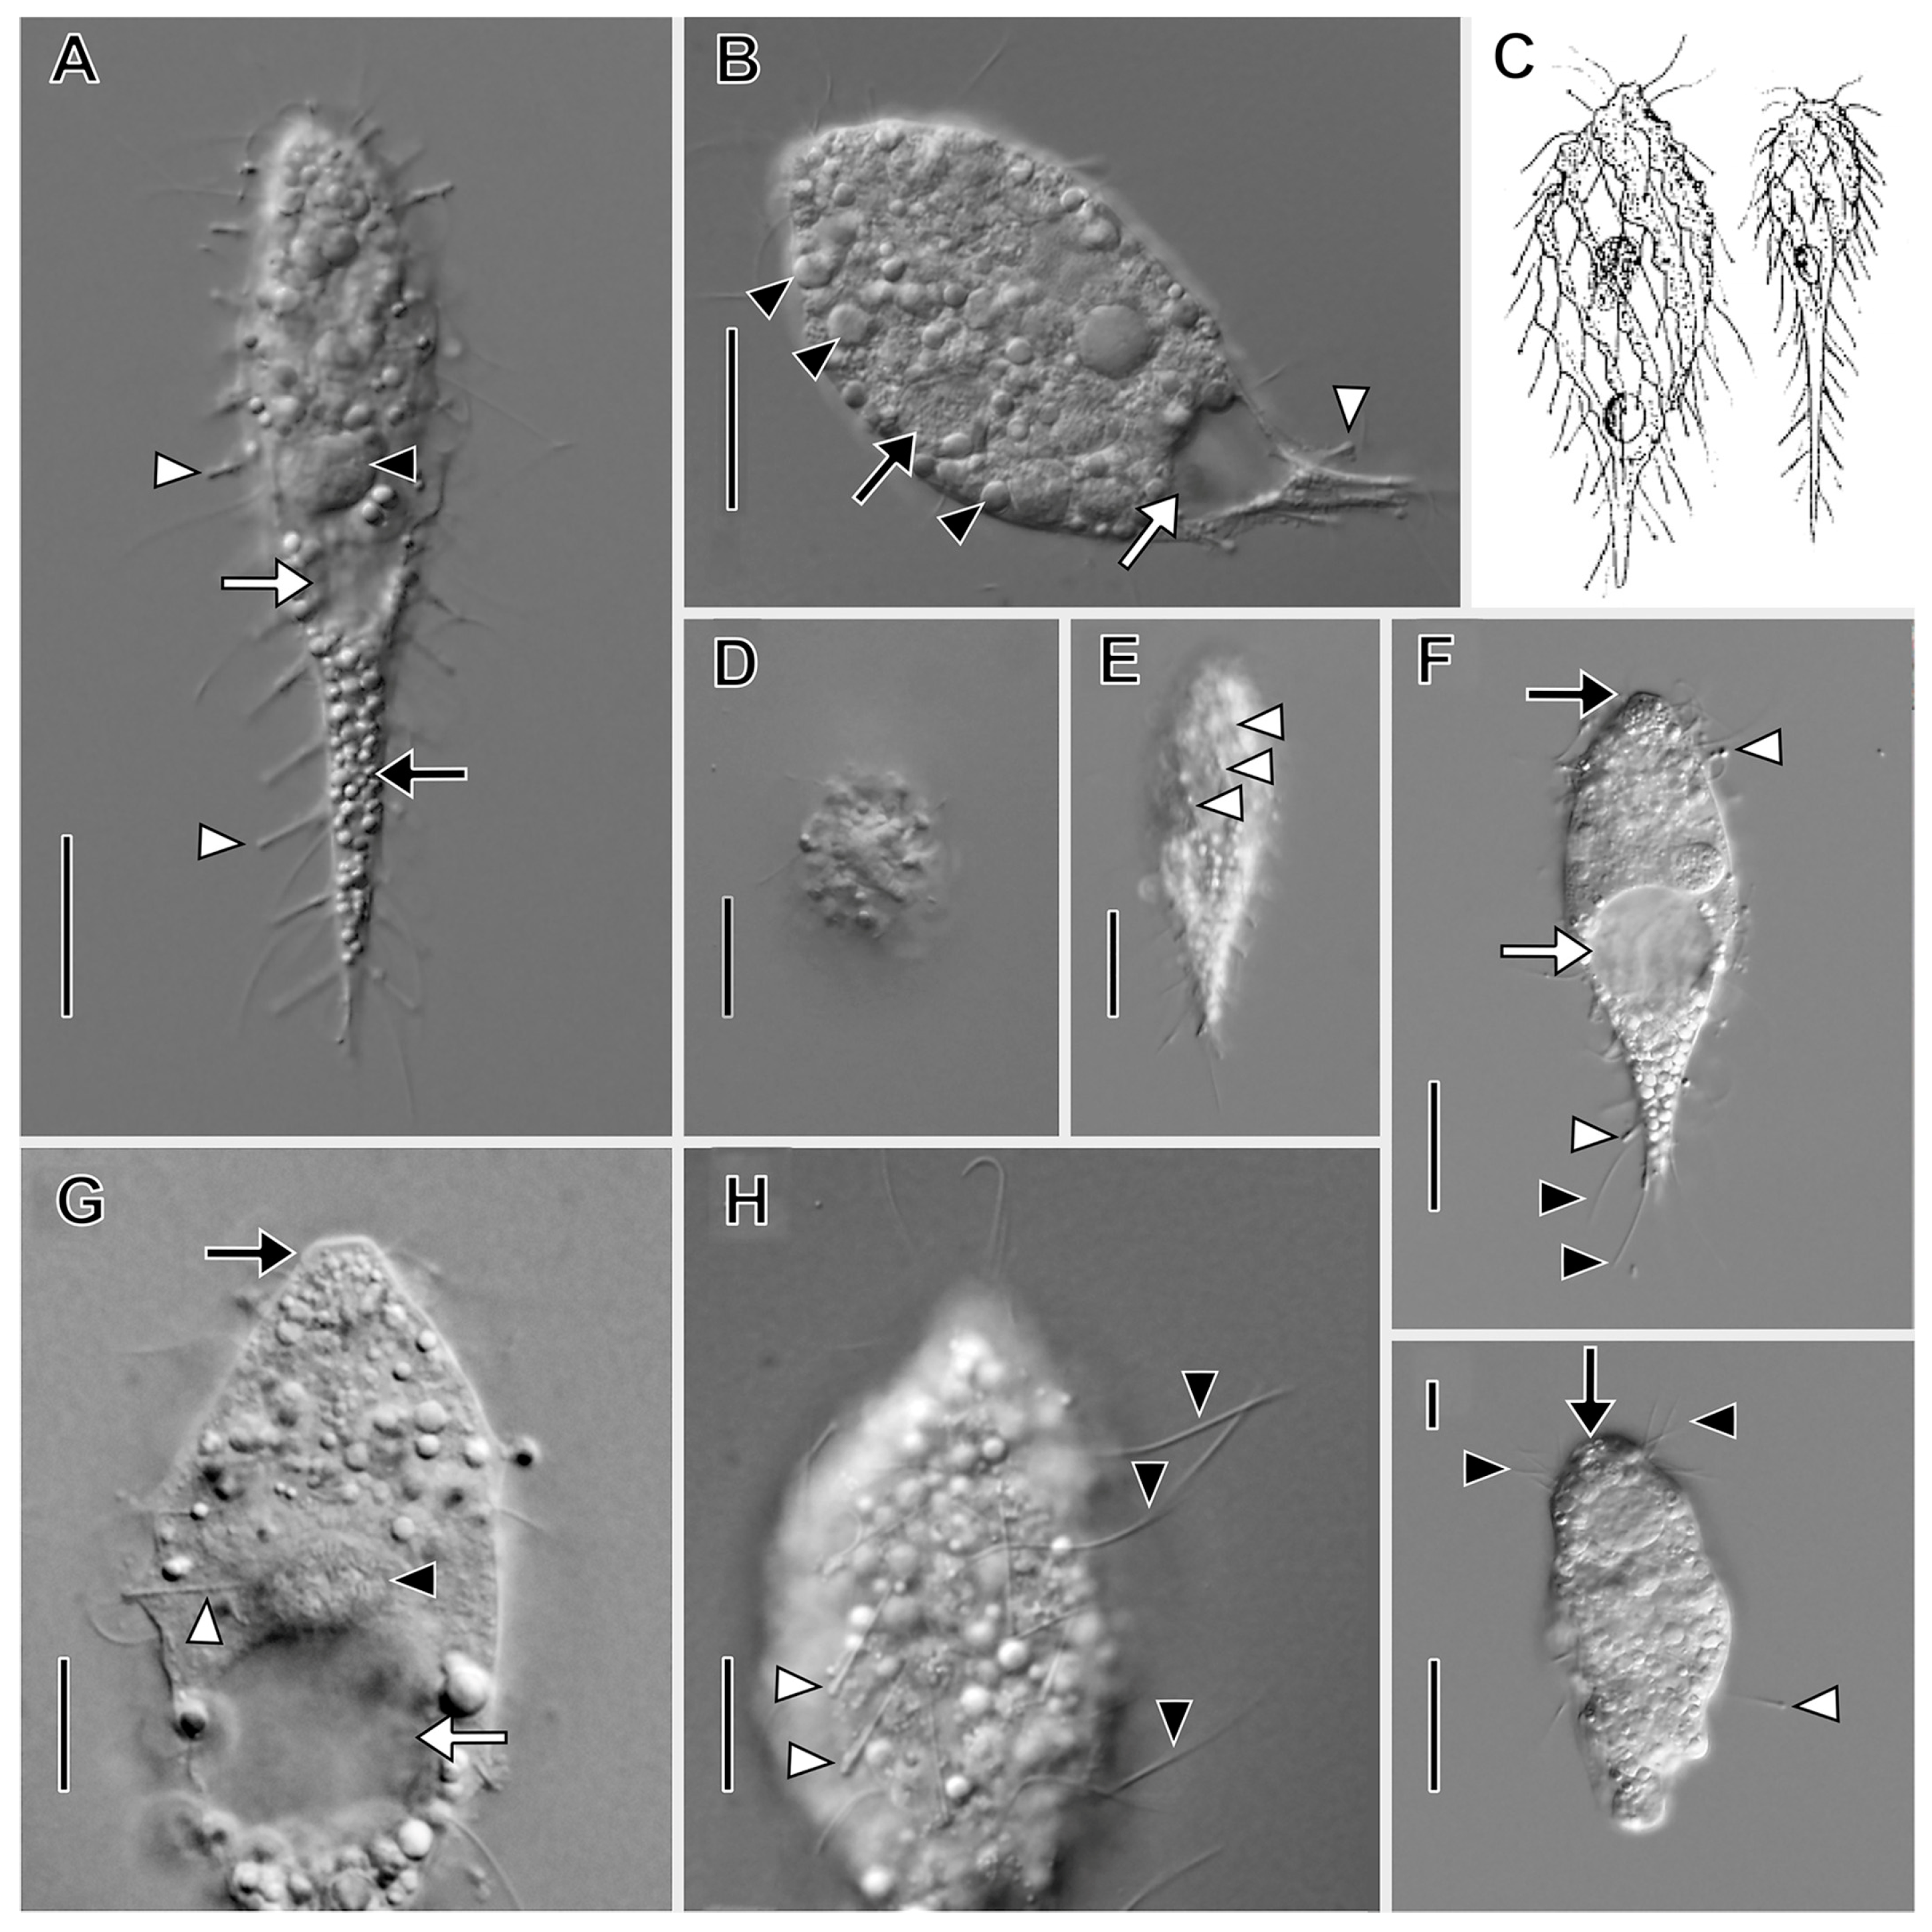 Biology Free Full-Text Rediscovery of Remarkably Rare Anaerobic Tentaculiferous Ciliate Genera Legendrea and Dactylochlamys (Ciliophora Litostomatea) image